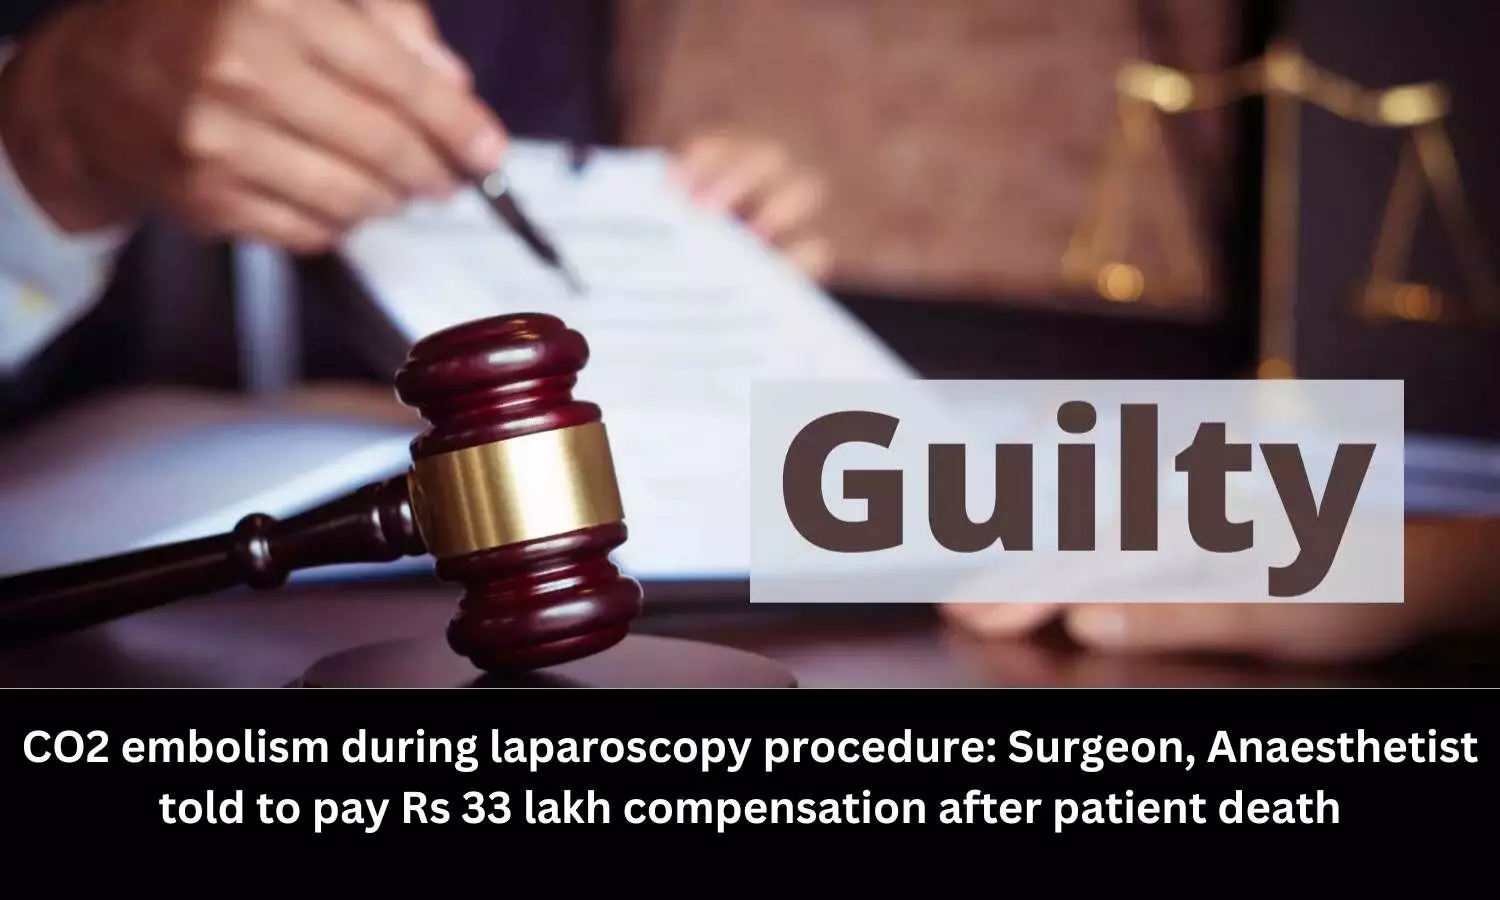 Death due to CO2 embolism during Laparoscopy procedure: Surgeon, Anesthetist ordered to pay Rs 33 lakh compensation